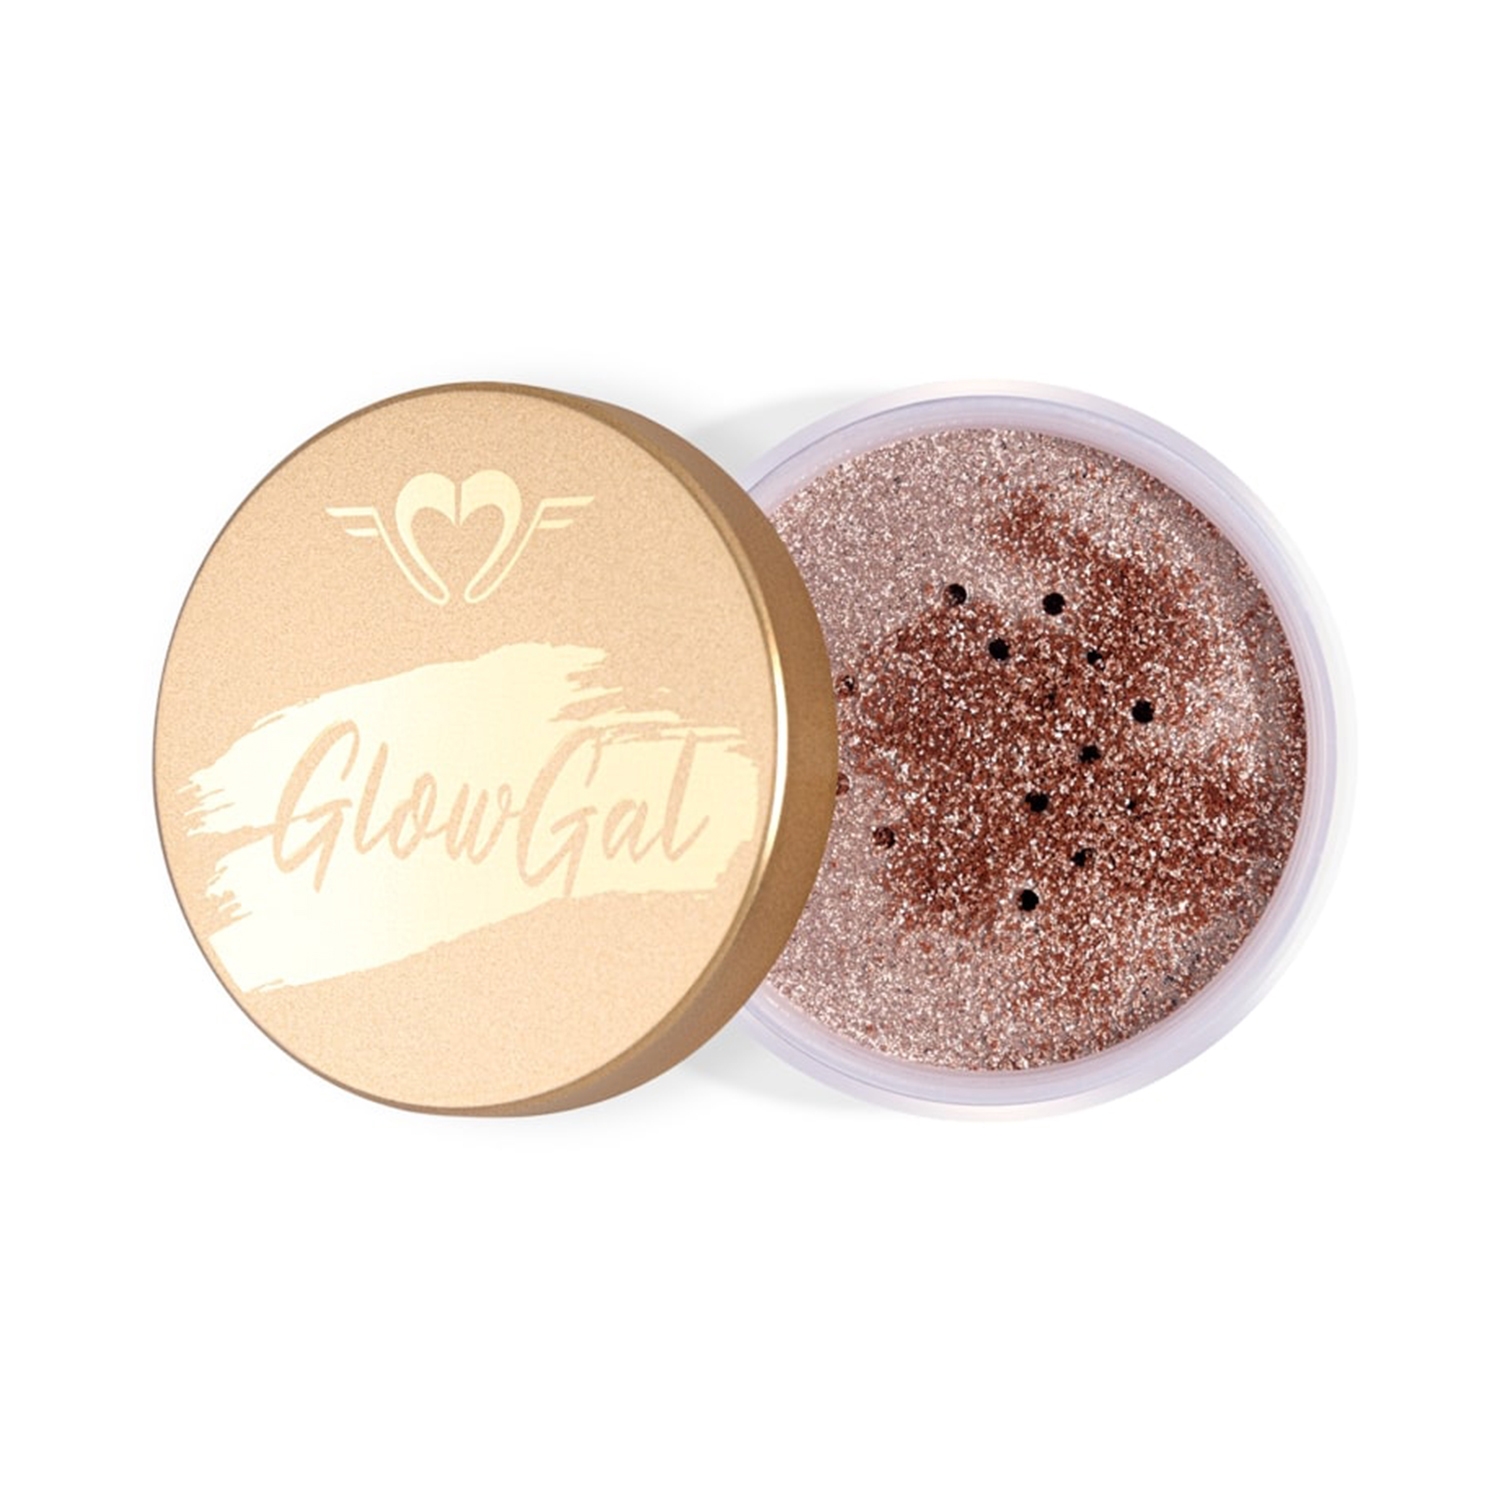 Daily Life Forever52 | Daily Life Forever52 Glow Gal Loose Highlighter GGH003 - Golden Brown (15g)